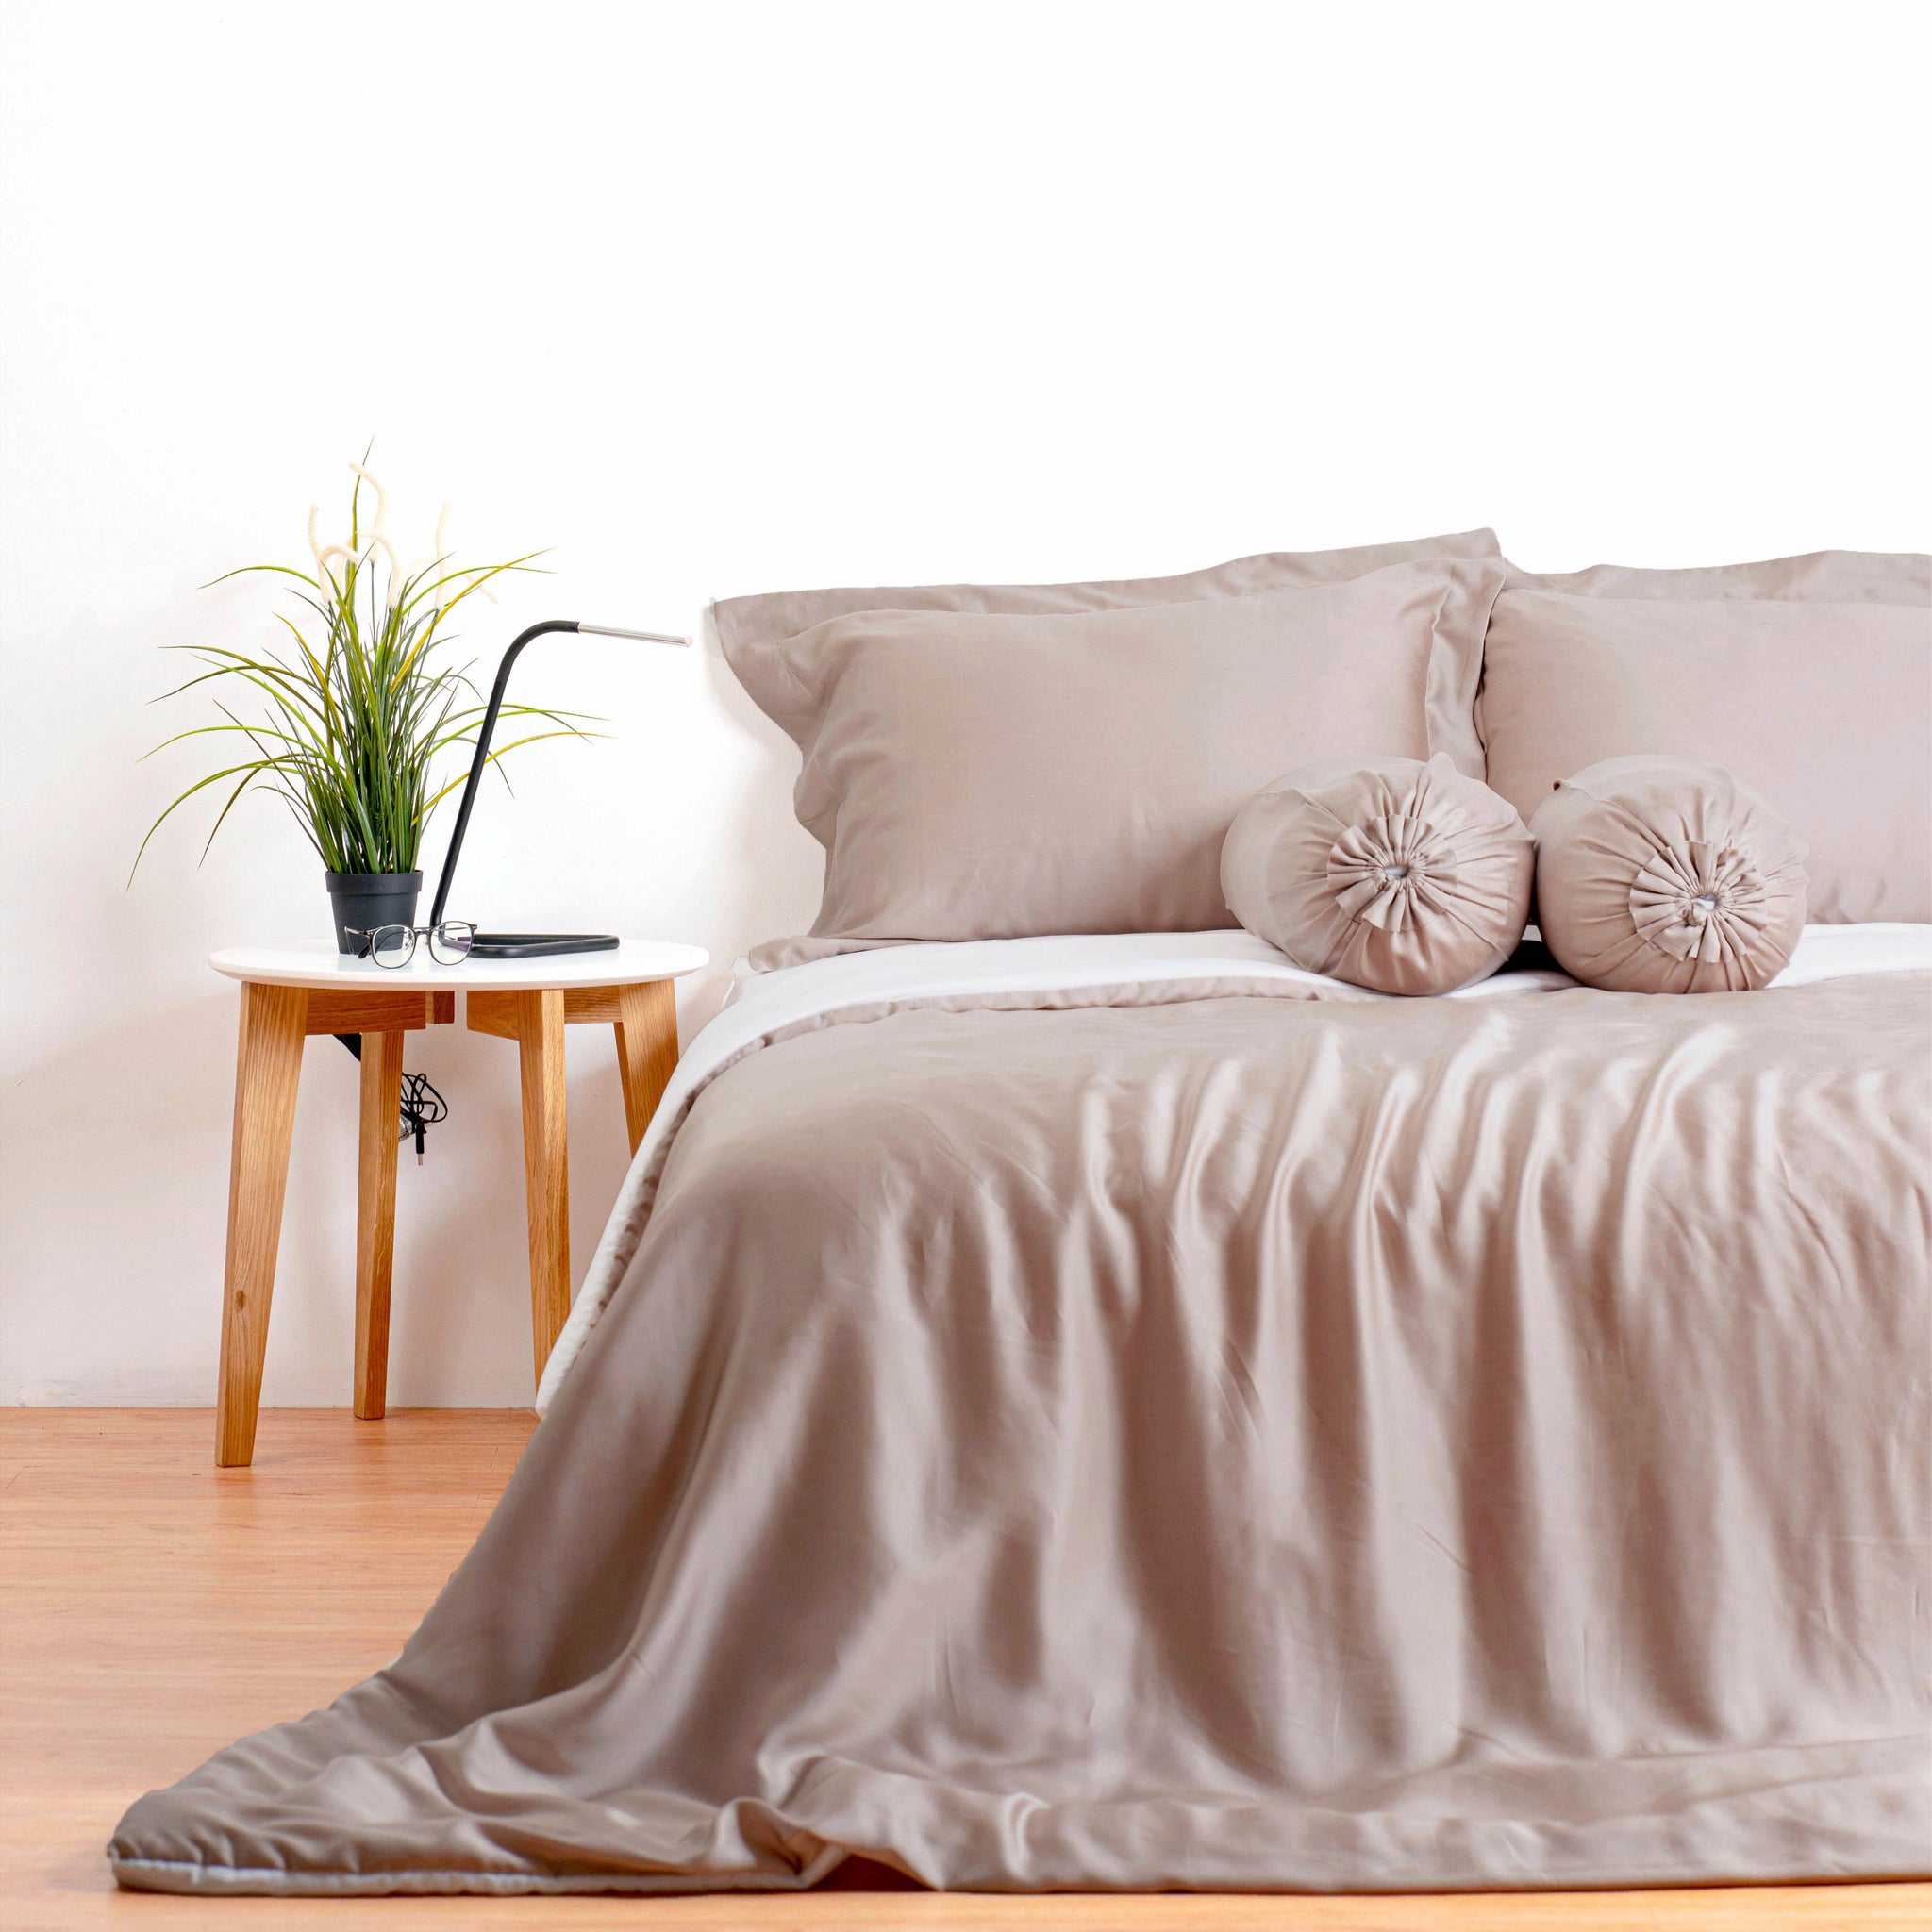 SAND N*DES! TENCEL™ Lyocell - Bed Cover